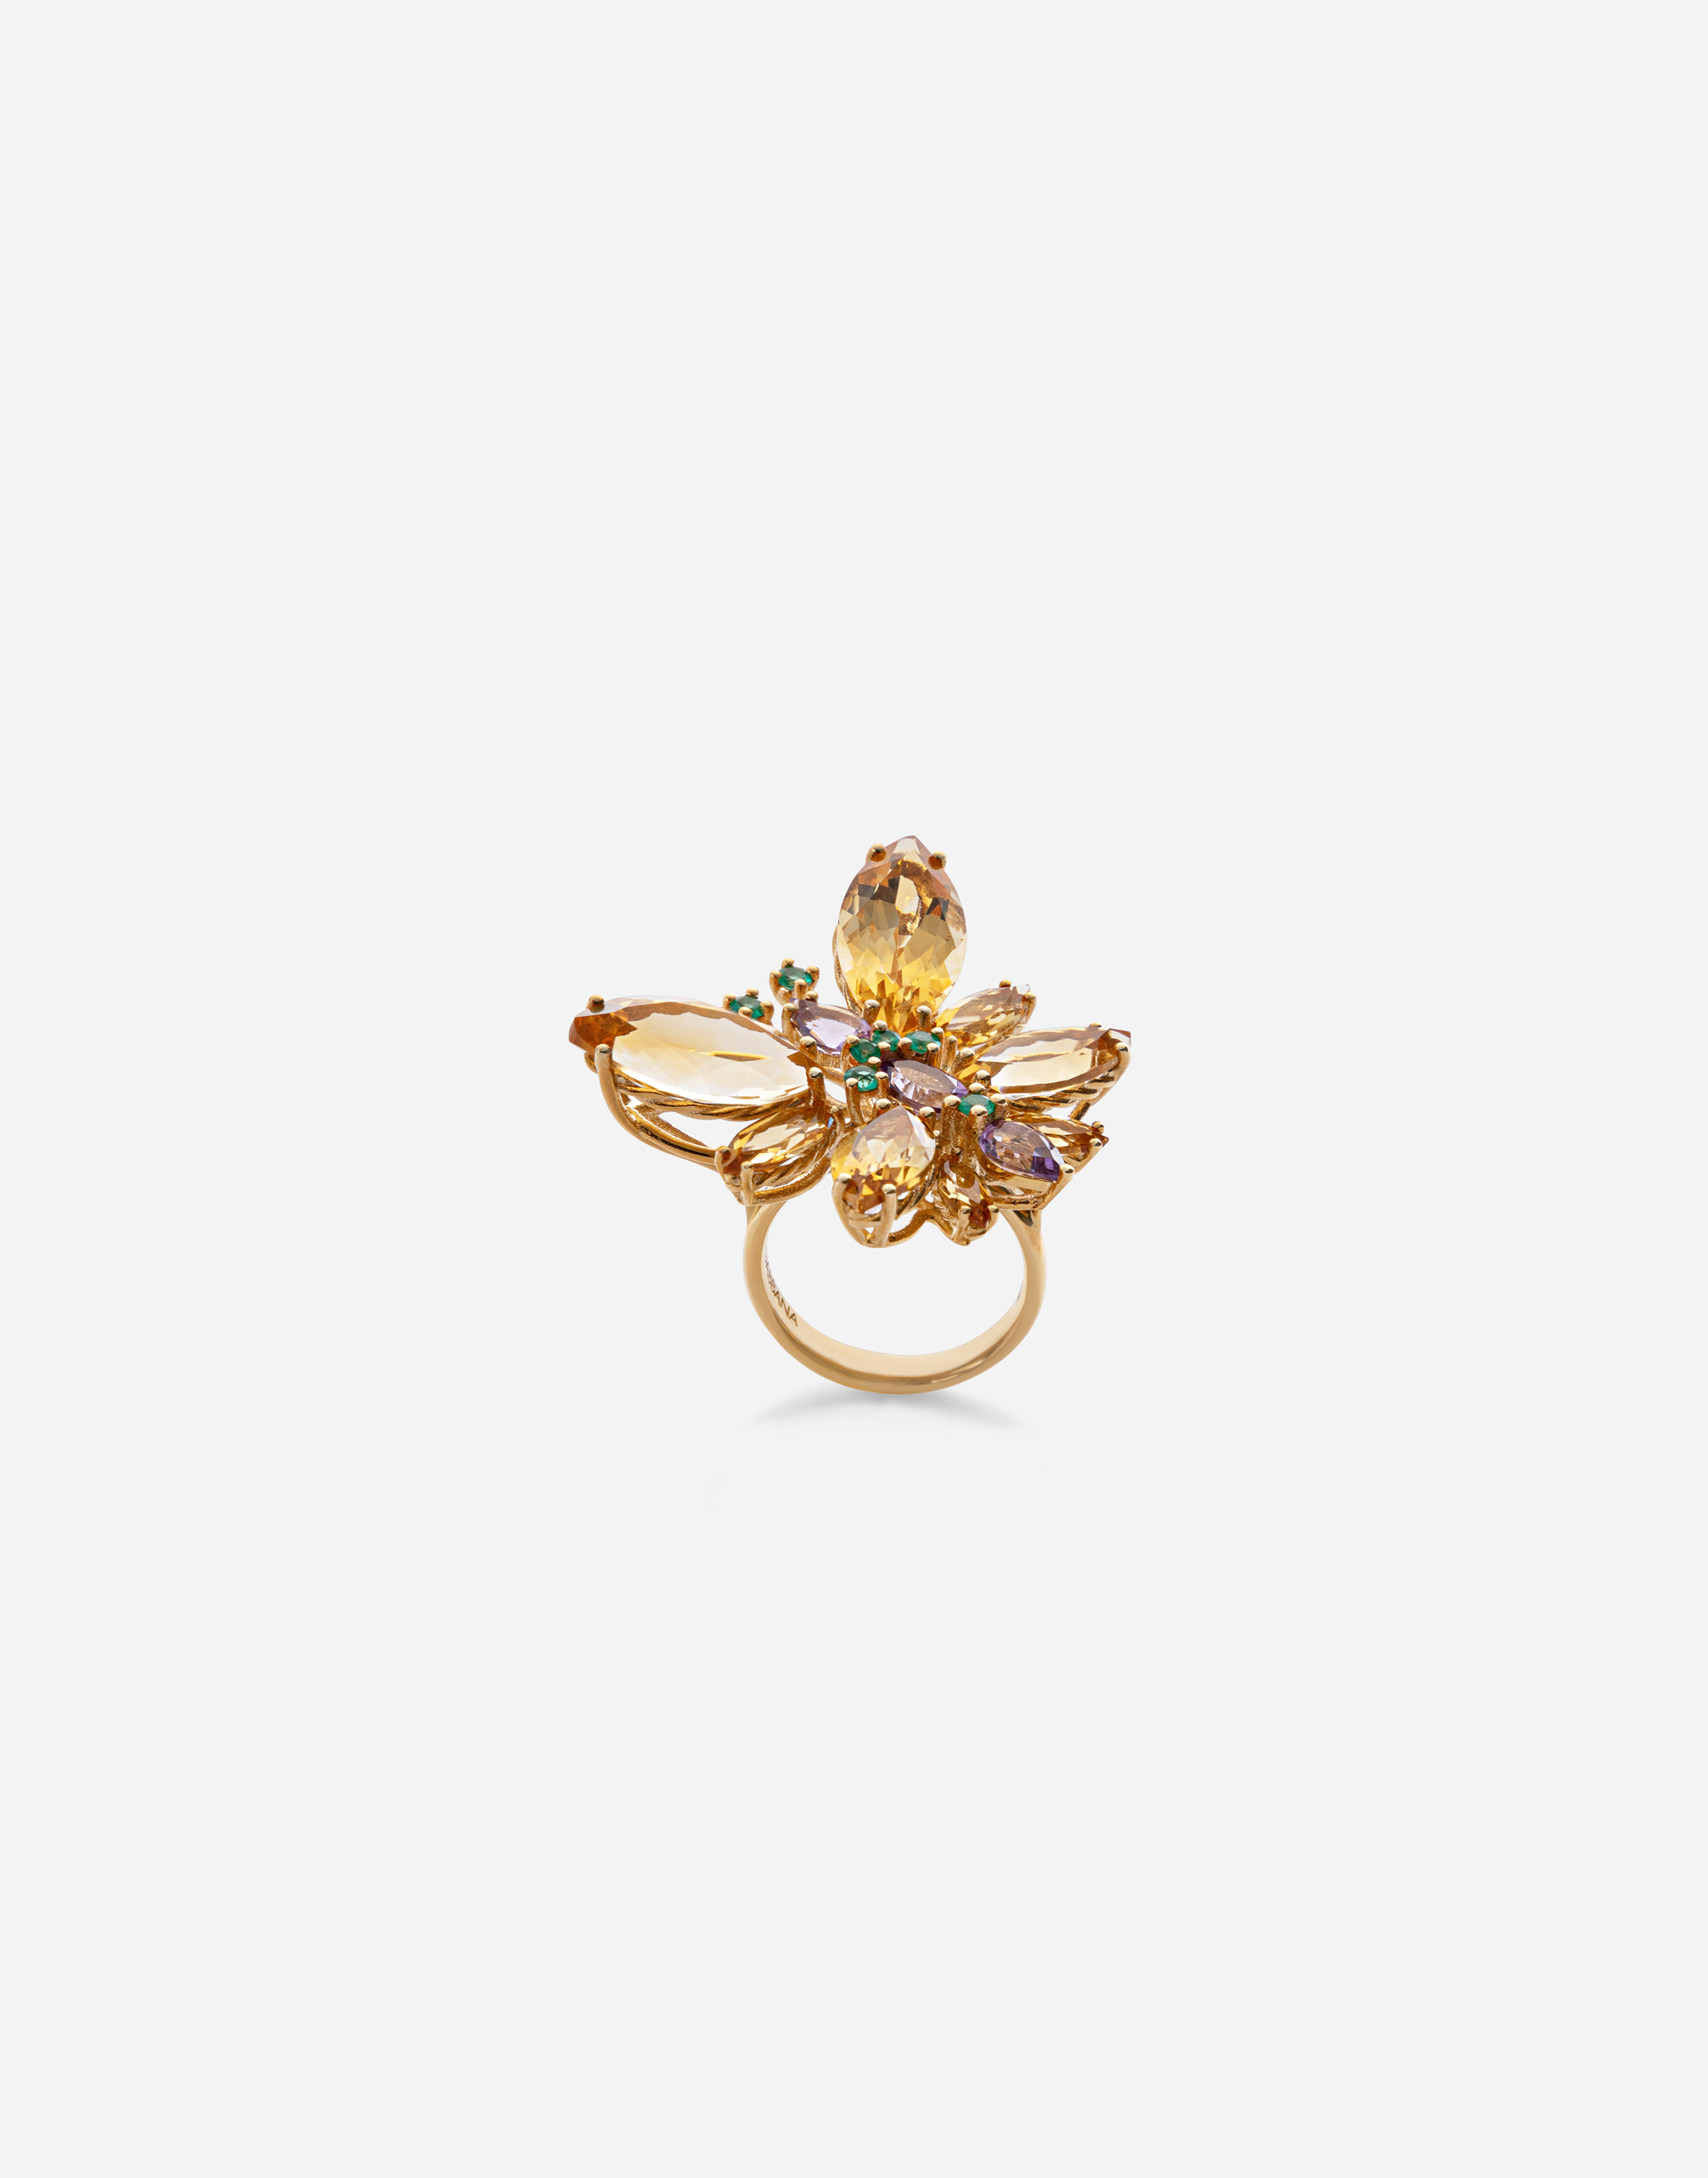 Spring ring in yellow 18kt gold with citrine butterfly in GOLD for 